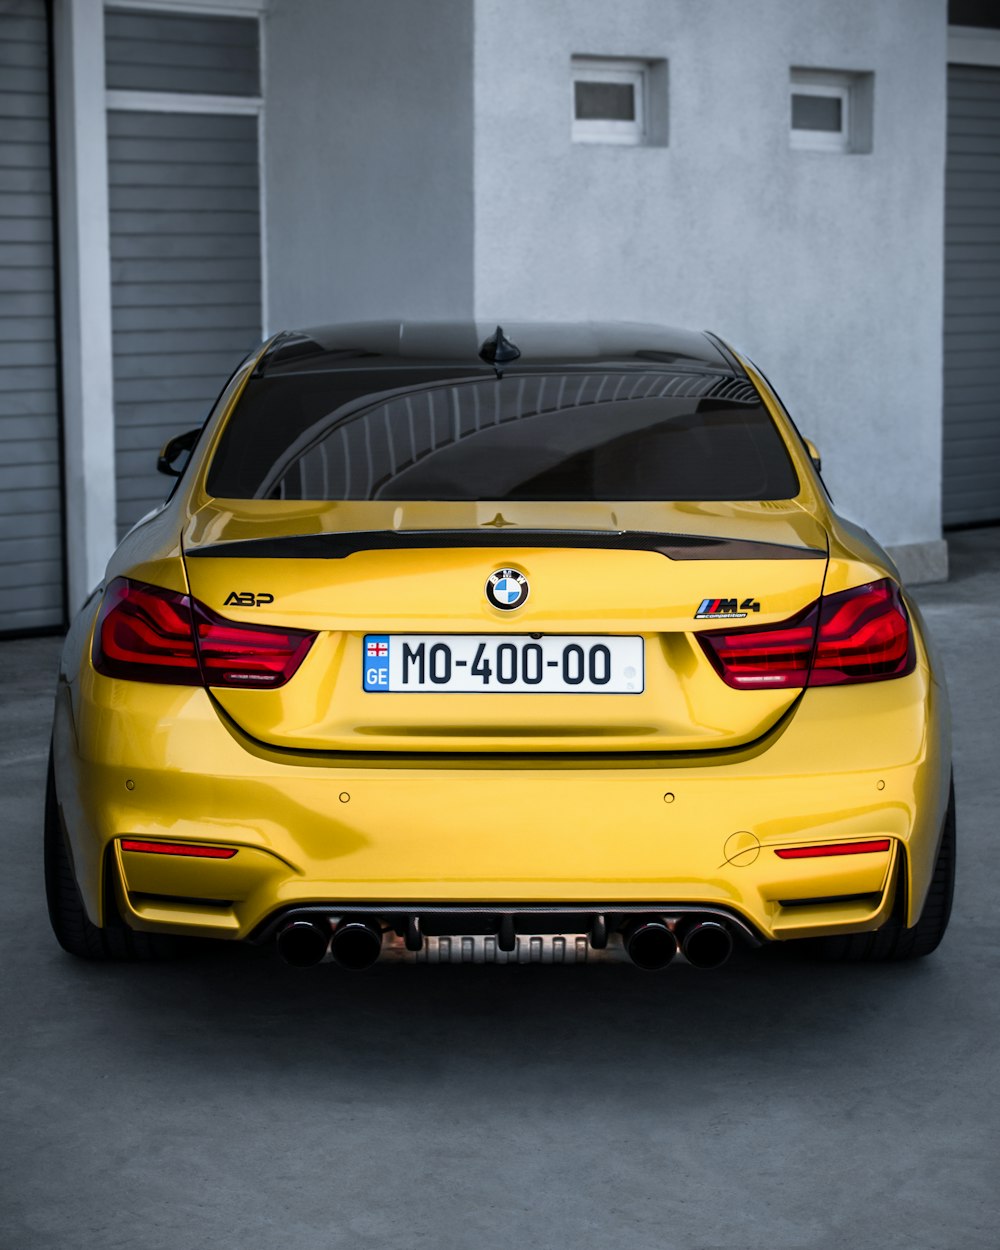 a yellow bmw car parked in a garage